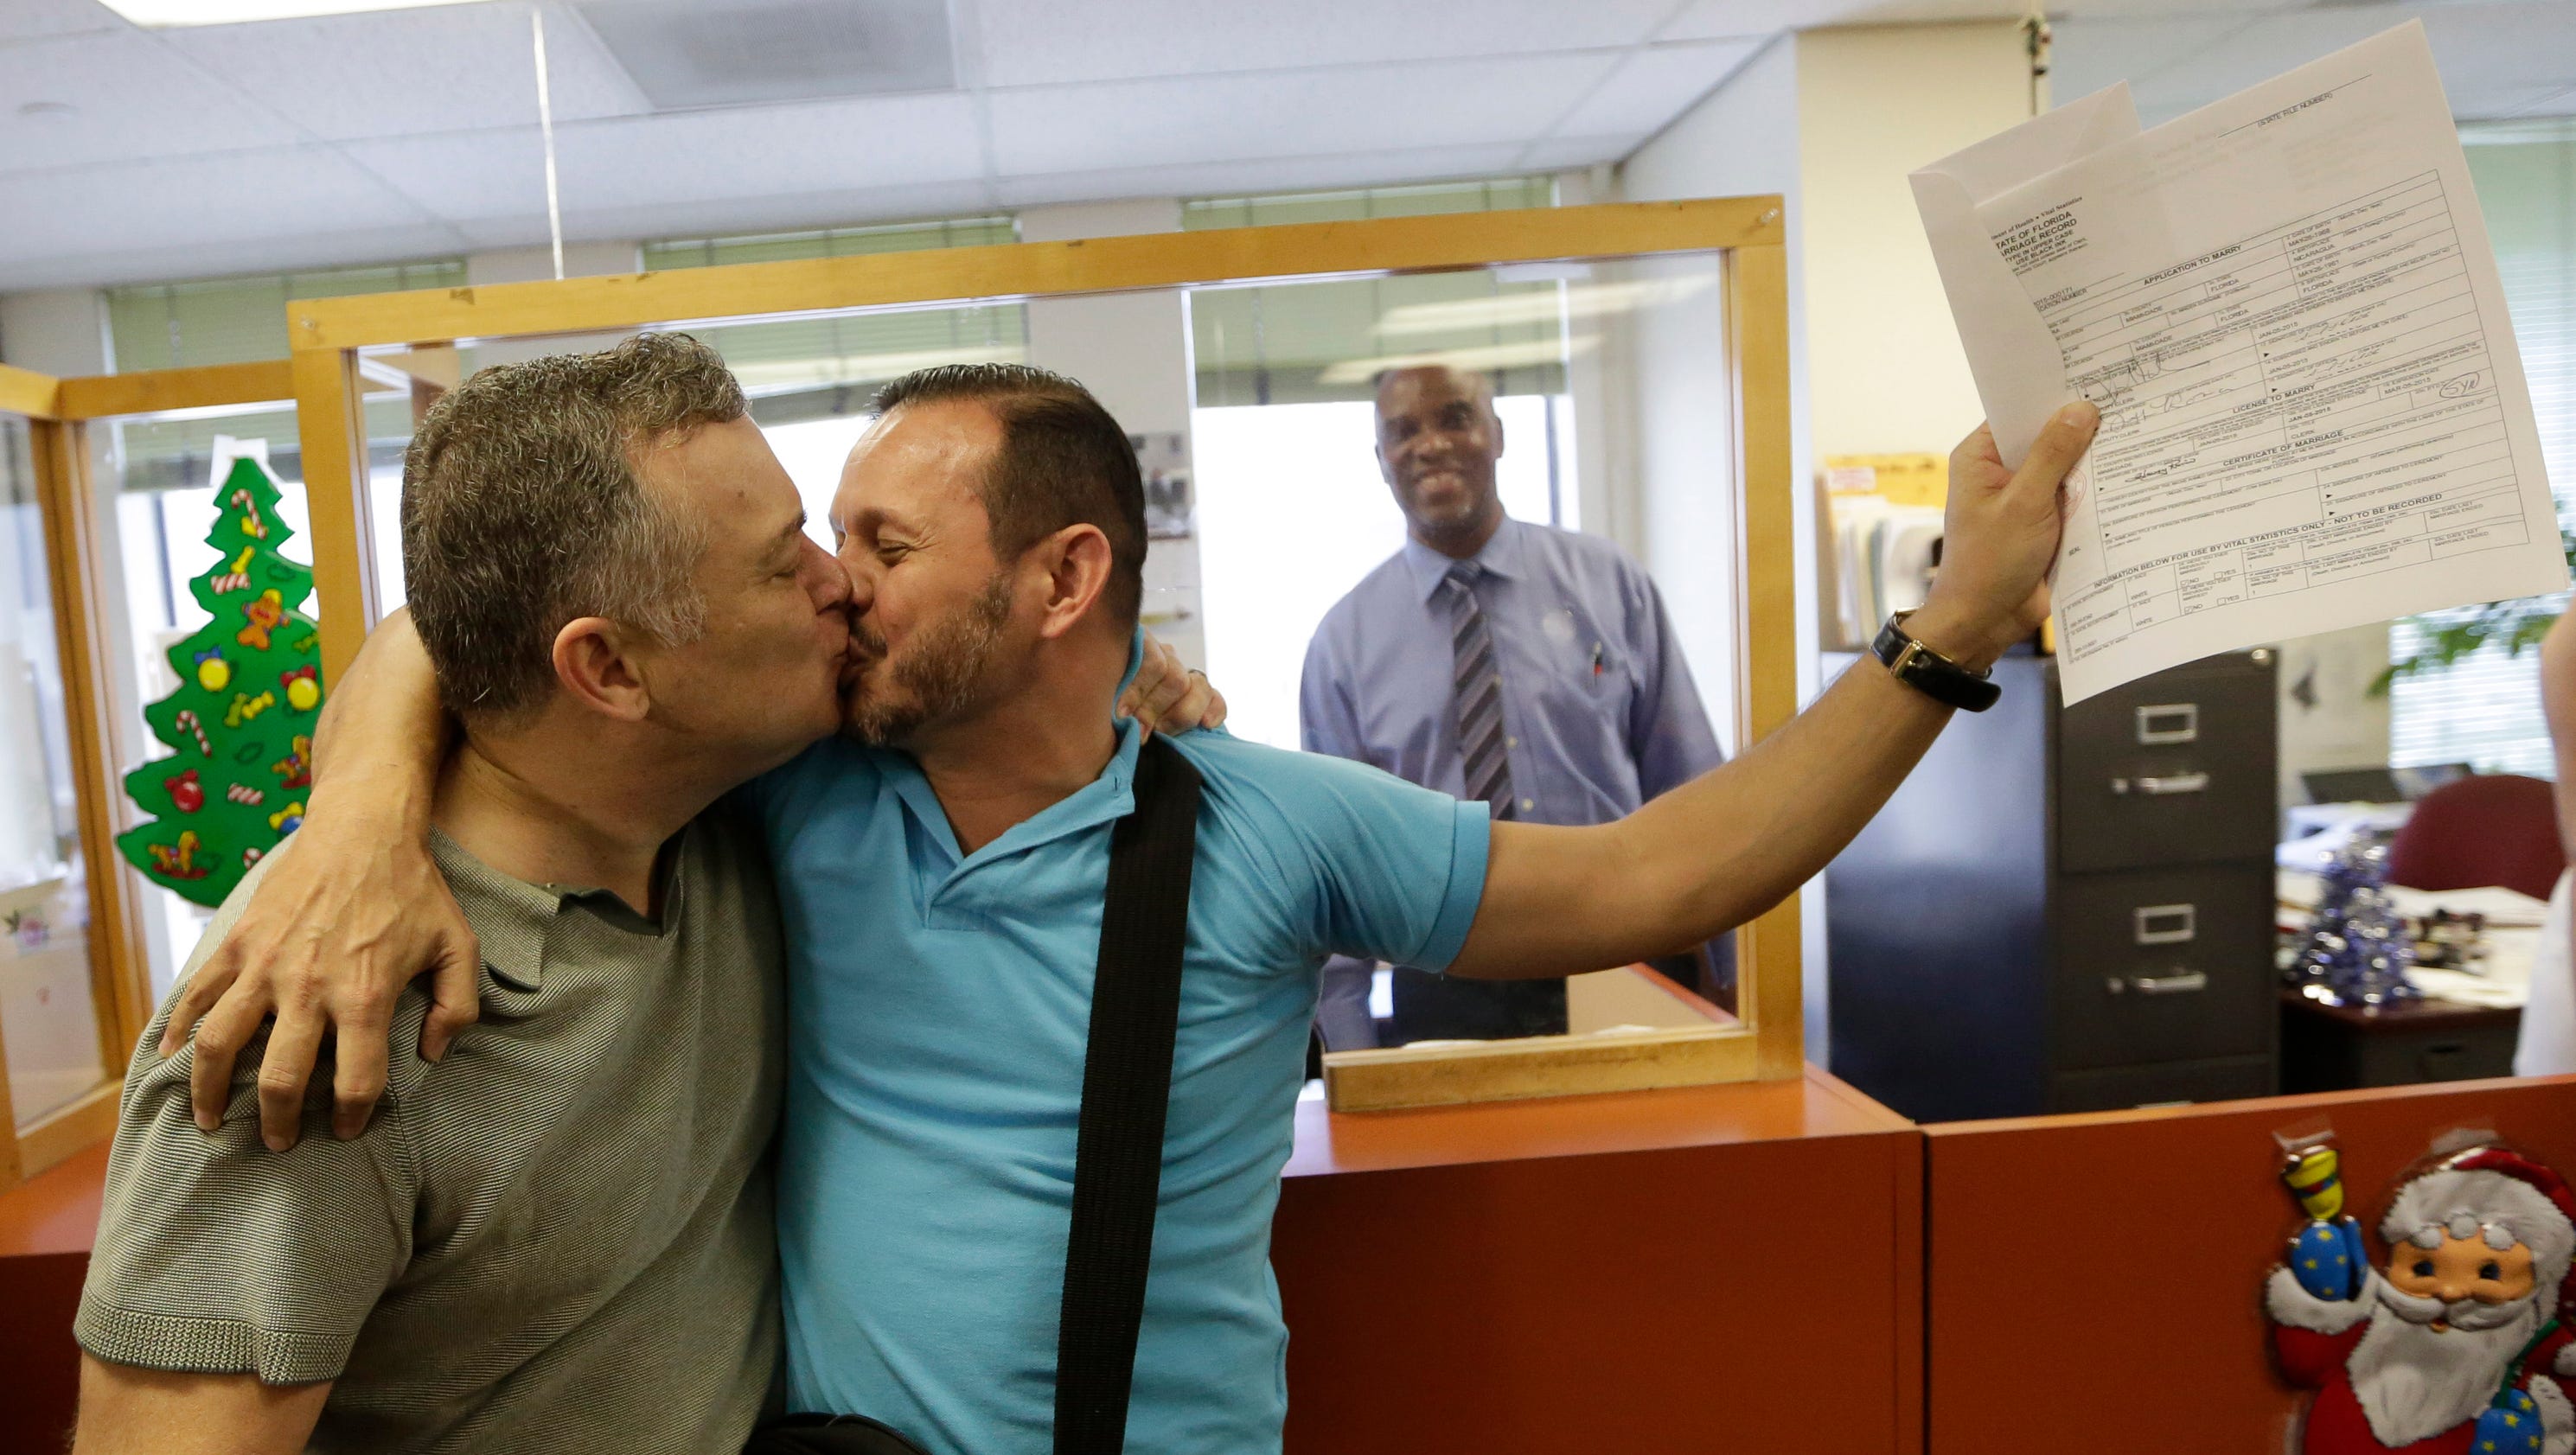 Miami Judge Weds Gays And Lesbians After Ruling Against Ban